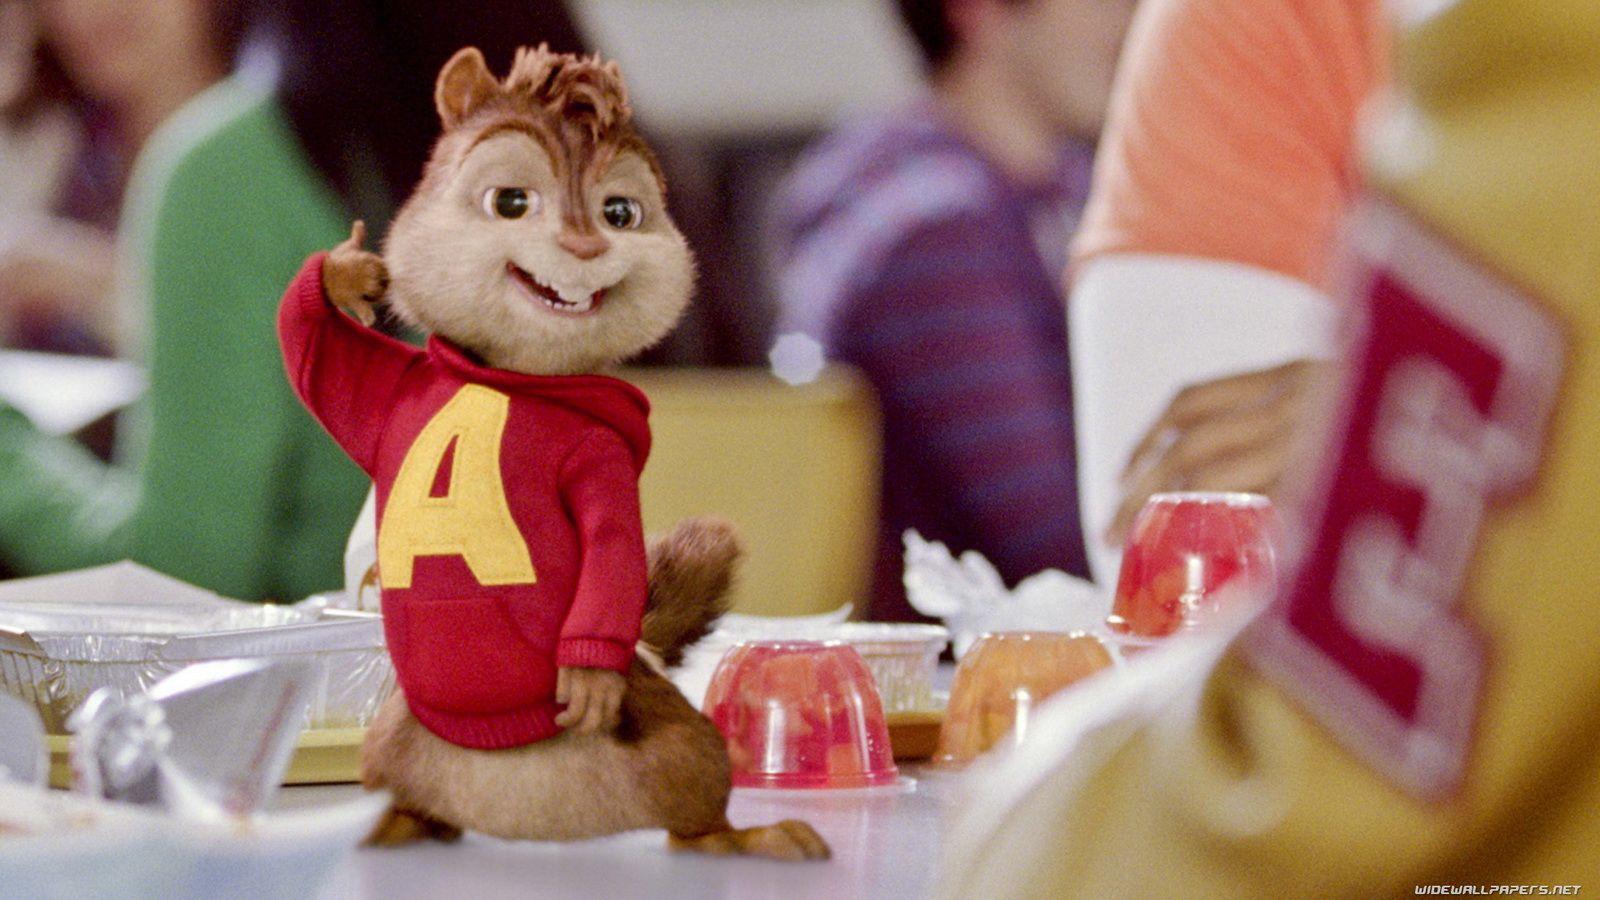 Alvin And The Chipmunks And The Chipettes. A1 Alvin And The